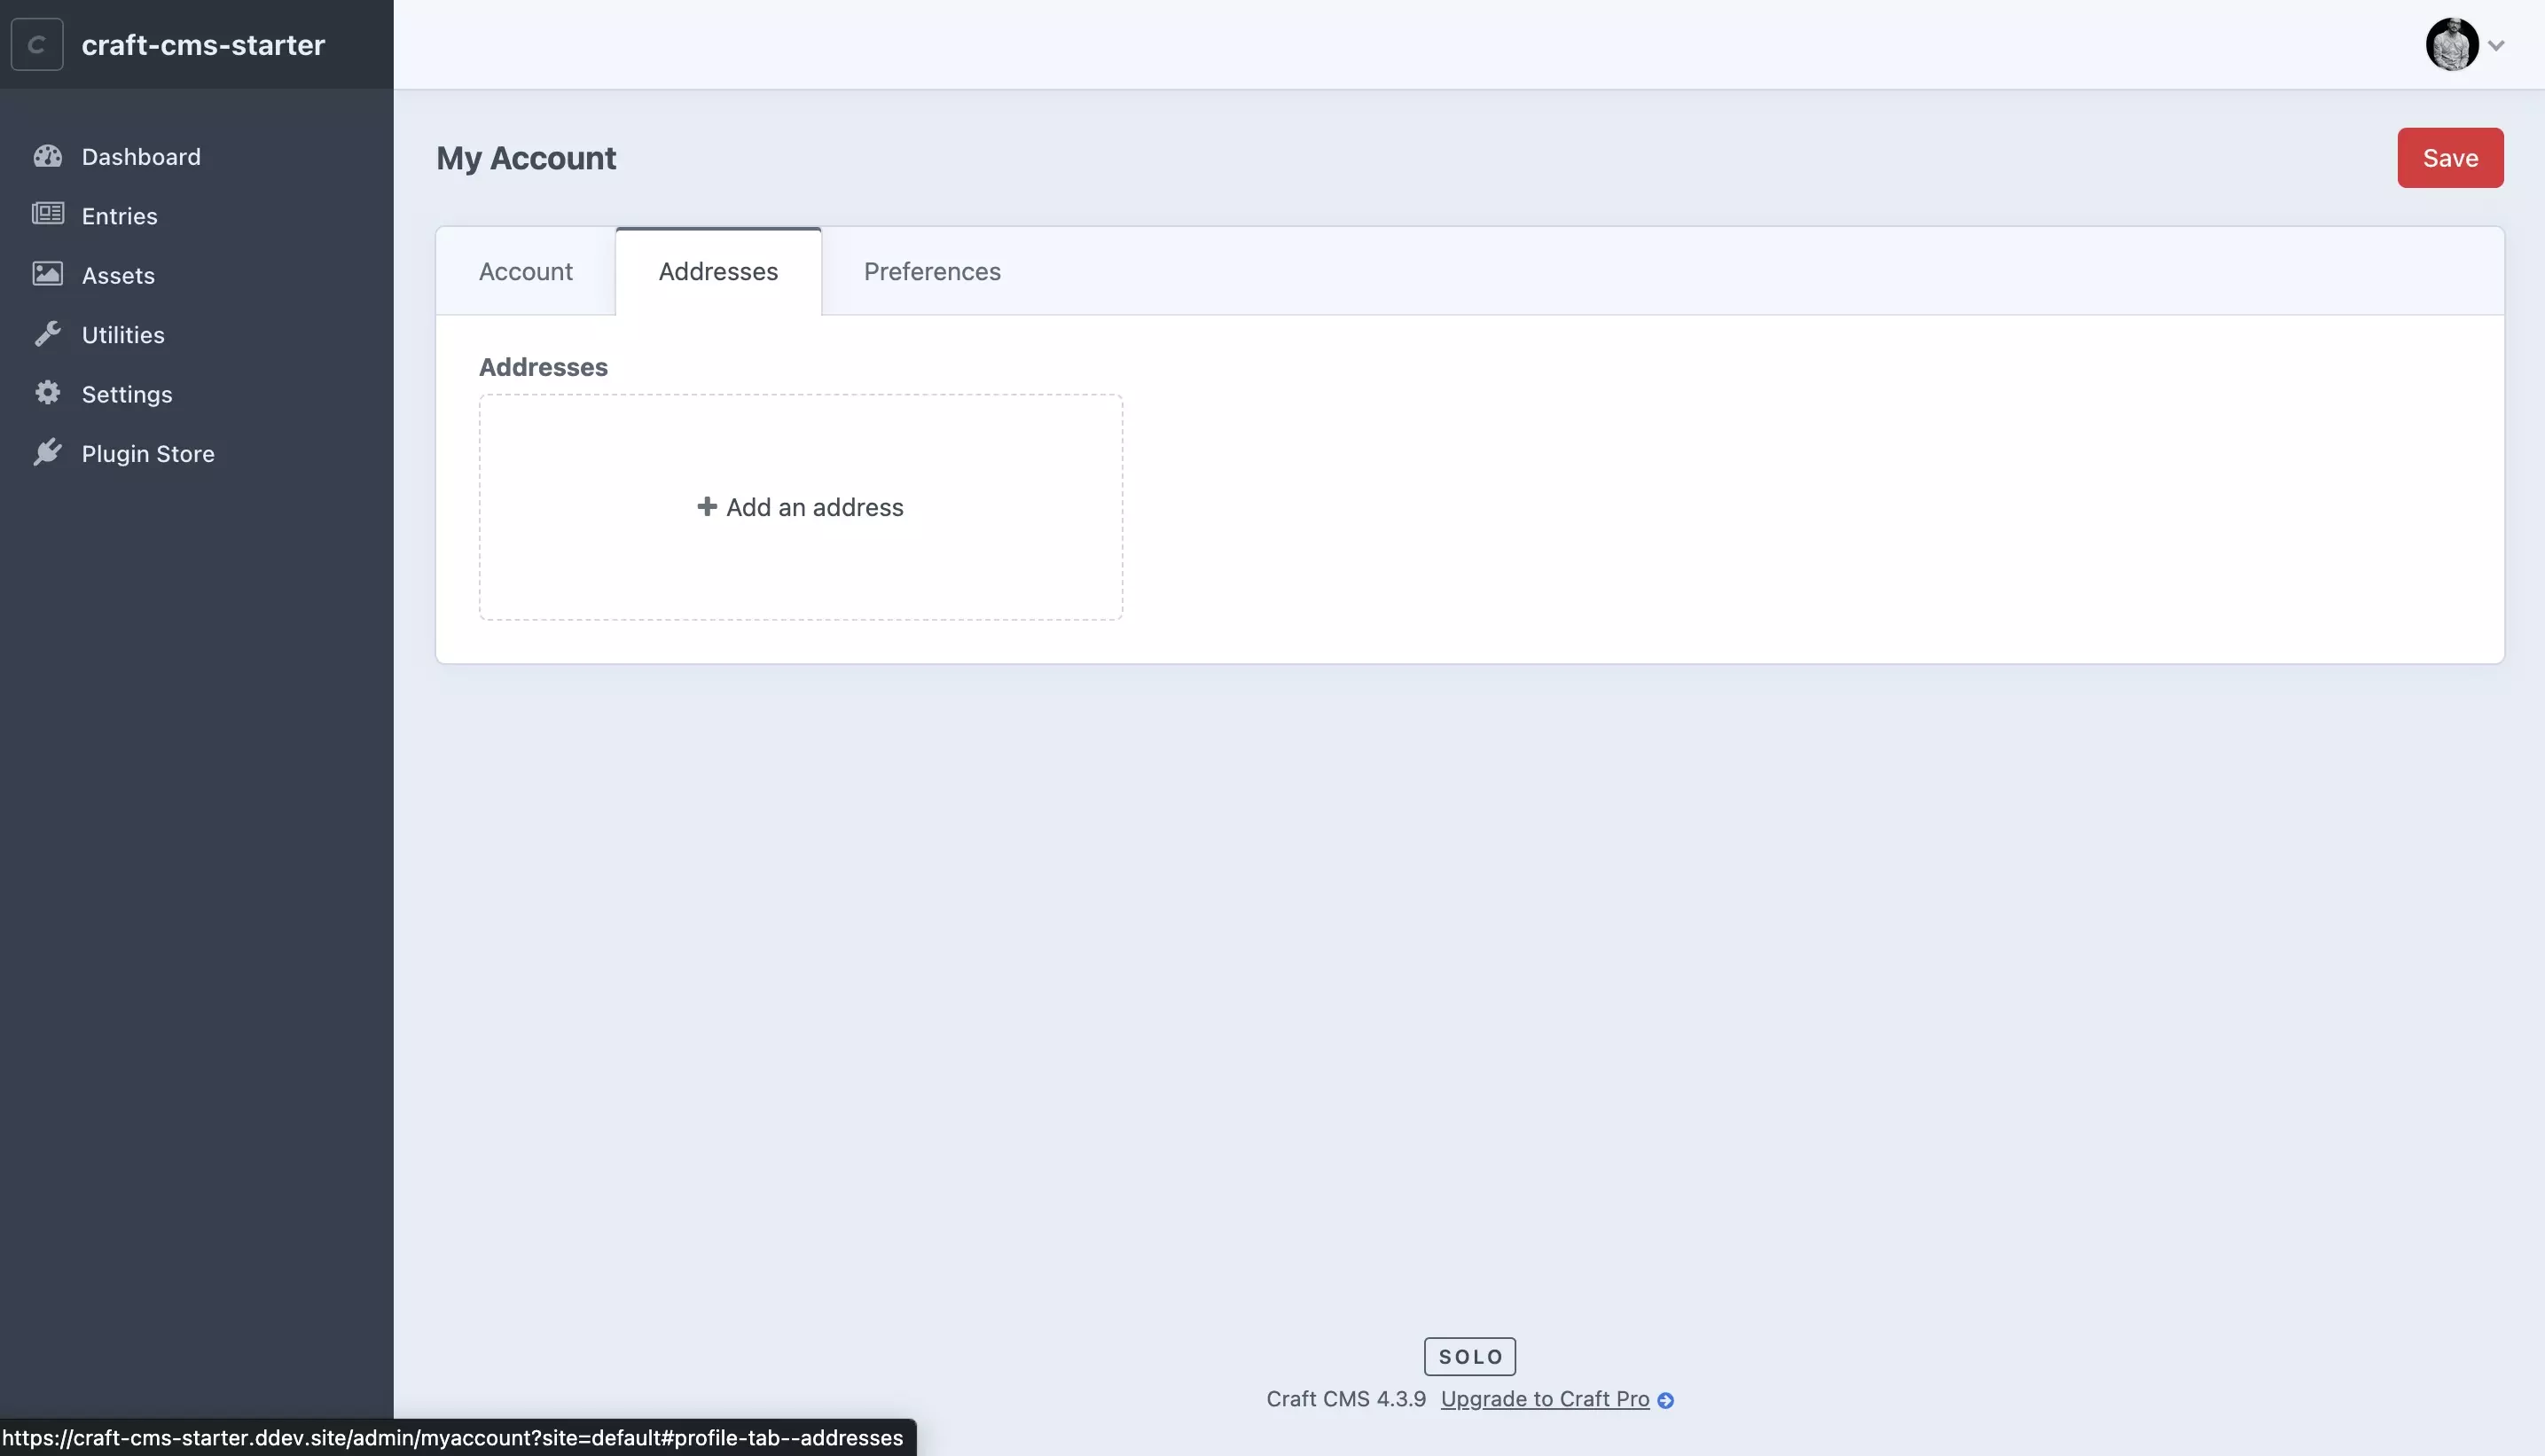 A screenshot of Craft CMS showing the new tab and field in the User account.